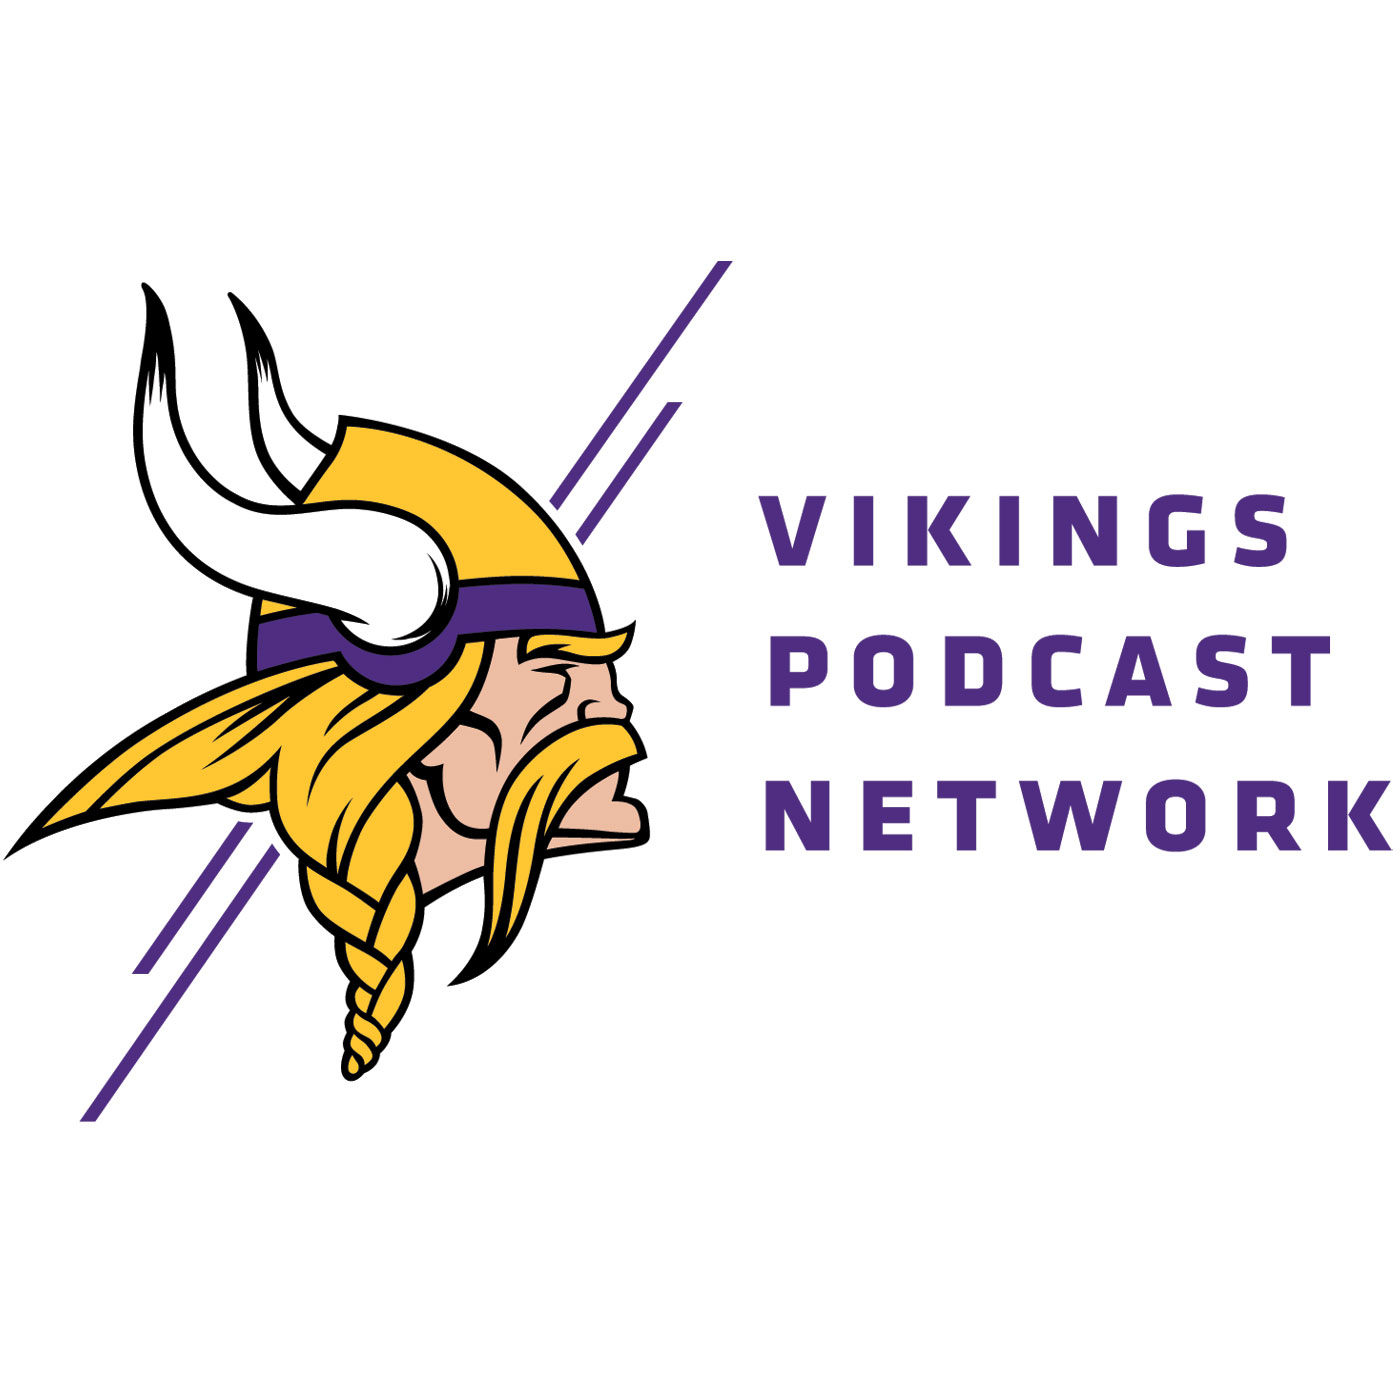 Minnesota Vikings Podcast: Director of Entertainment Greg Bostrom Joins to Preview U.S. Bank Stadium Home Opener Fan Return Experience Against the Seahawks | Episode 112